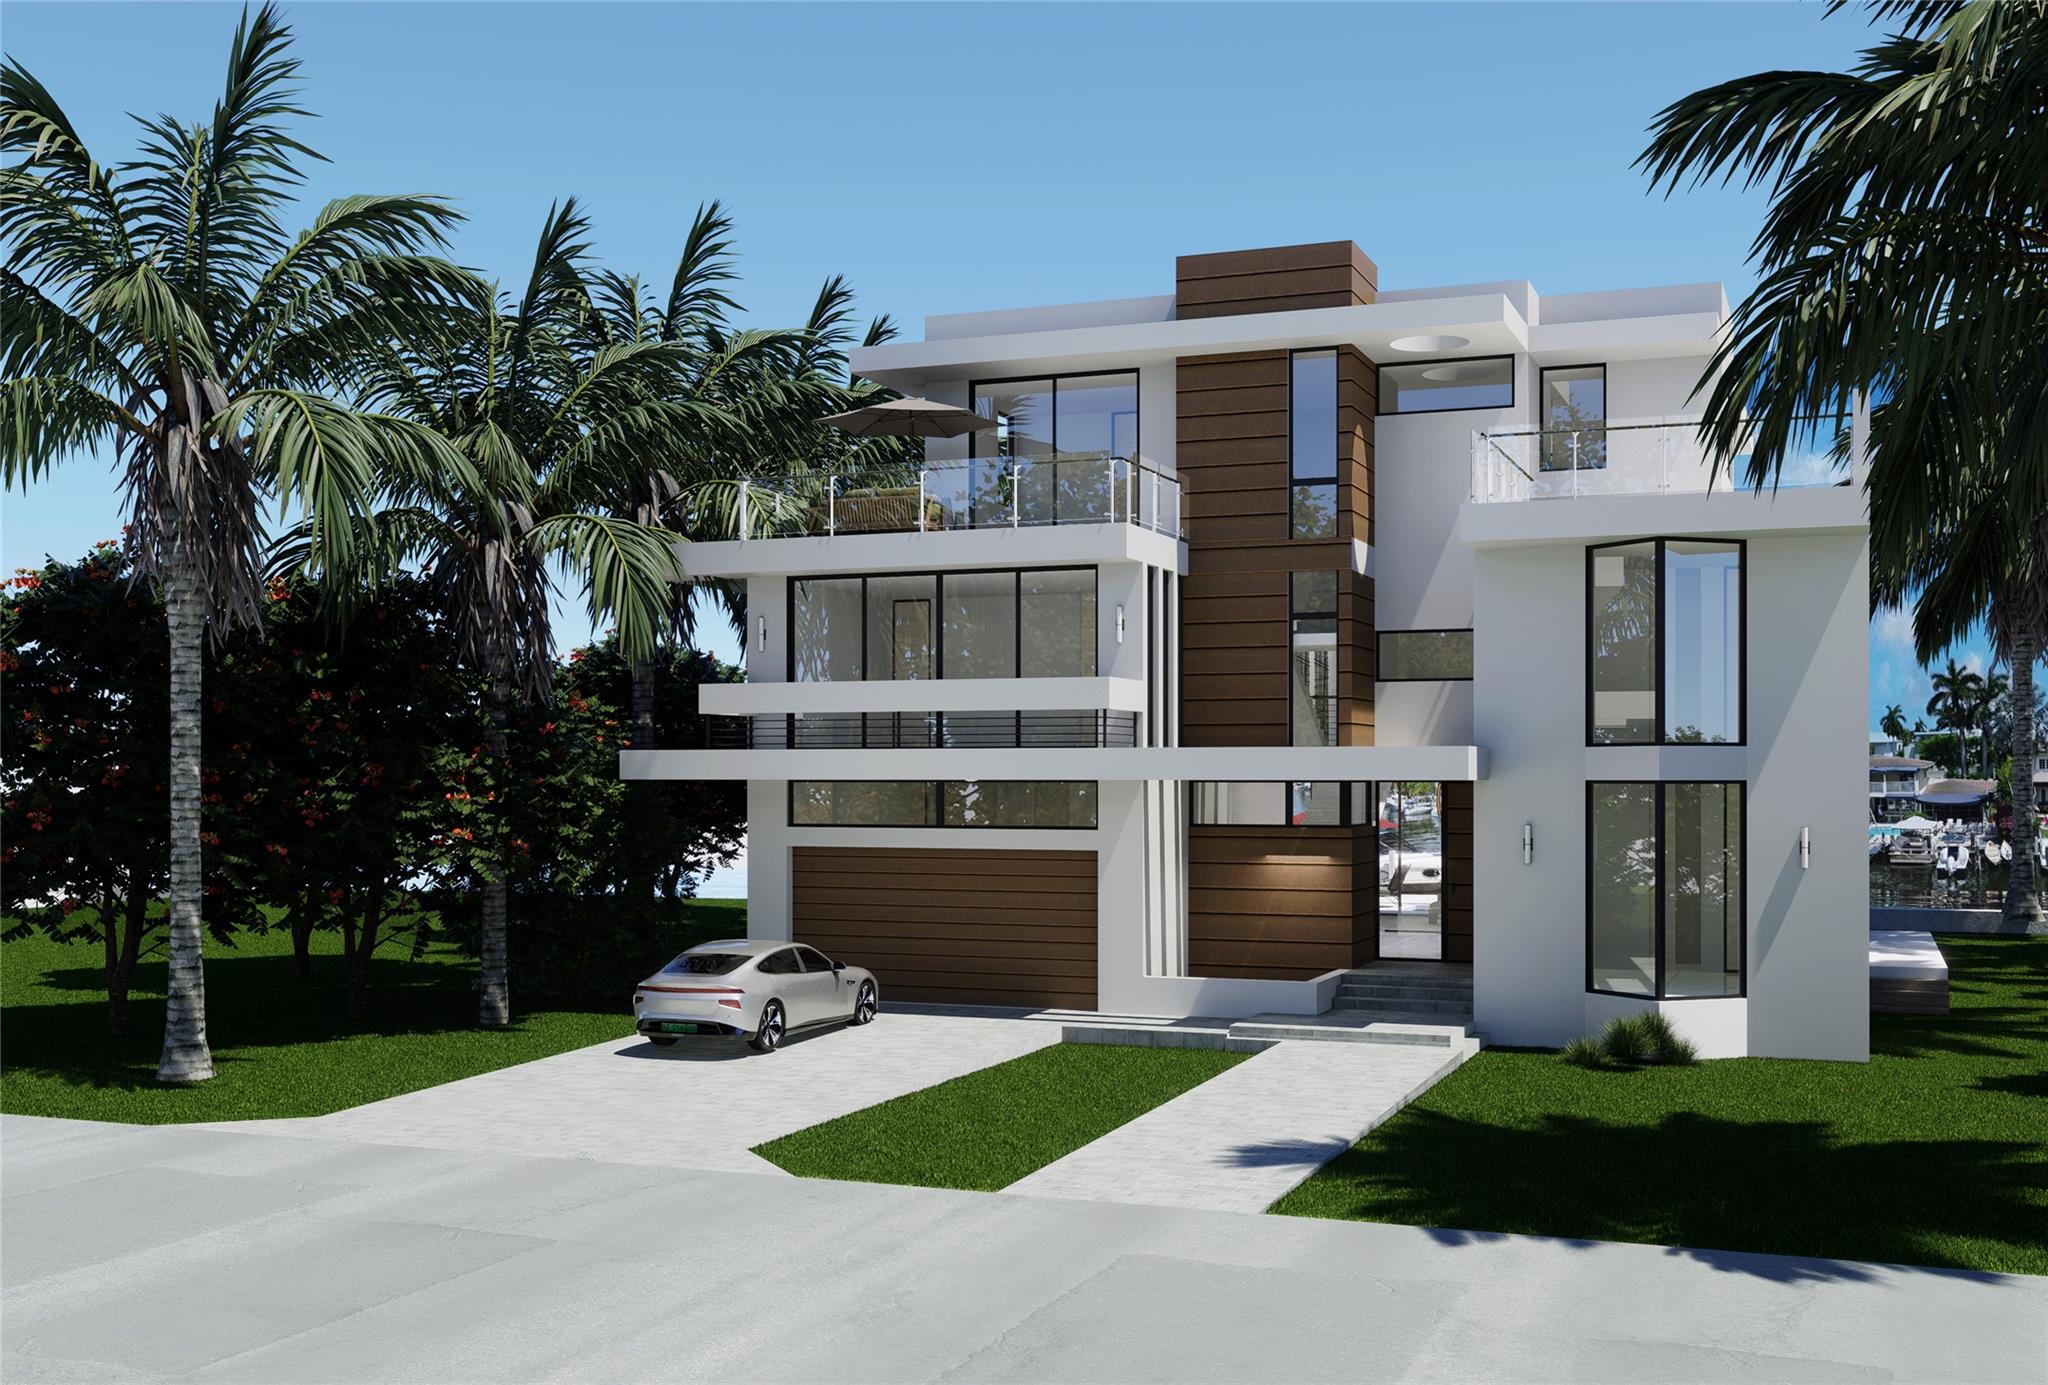 New Construction/Under construction. Contemporary waterfront estate in the heart of exclusive Lauderdale Harbors, Rio Vista. Modern masterpiece by acclaimed architect Robert Tuthill, built by Jeff Hendricks, this 3-story home has it all, including an elevator. Downtown Fort Lauderdale and Intracoastal views, walk to stores, restaurants, and Lauderdale Yacht Club. Designed to ensure comfort, practicality, and state-of-the-art living. Ocean access is 5 minutes to the Everglades Inlet by boat no fixed bridges, 10 mins to the FLL airport, Downtown, and beach. Perfect time to buy to customize finishes to your preference. Full plans are available upon inquiry. The renderings are artistic interpretations. Price may adjust during construction depending on the final finishes and features.